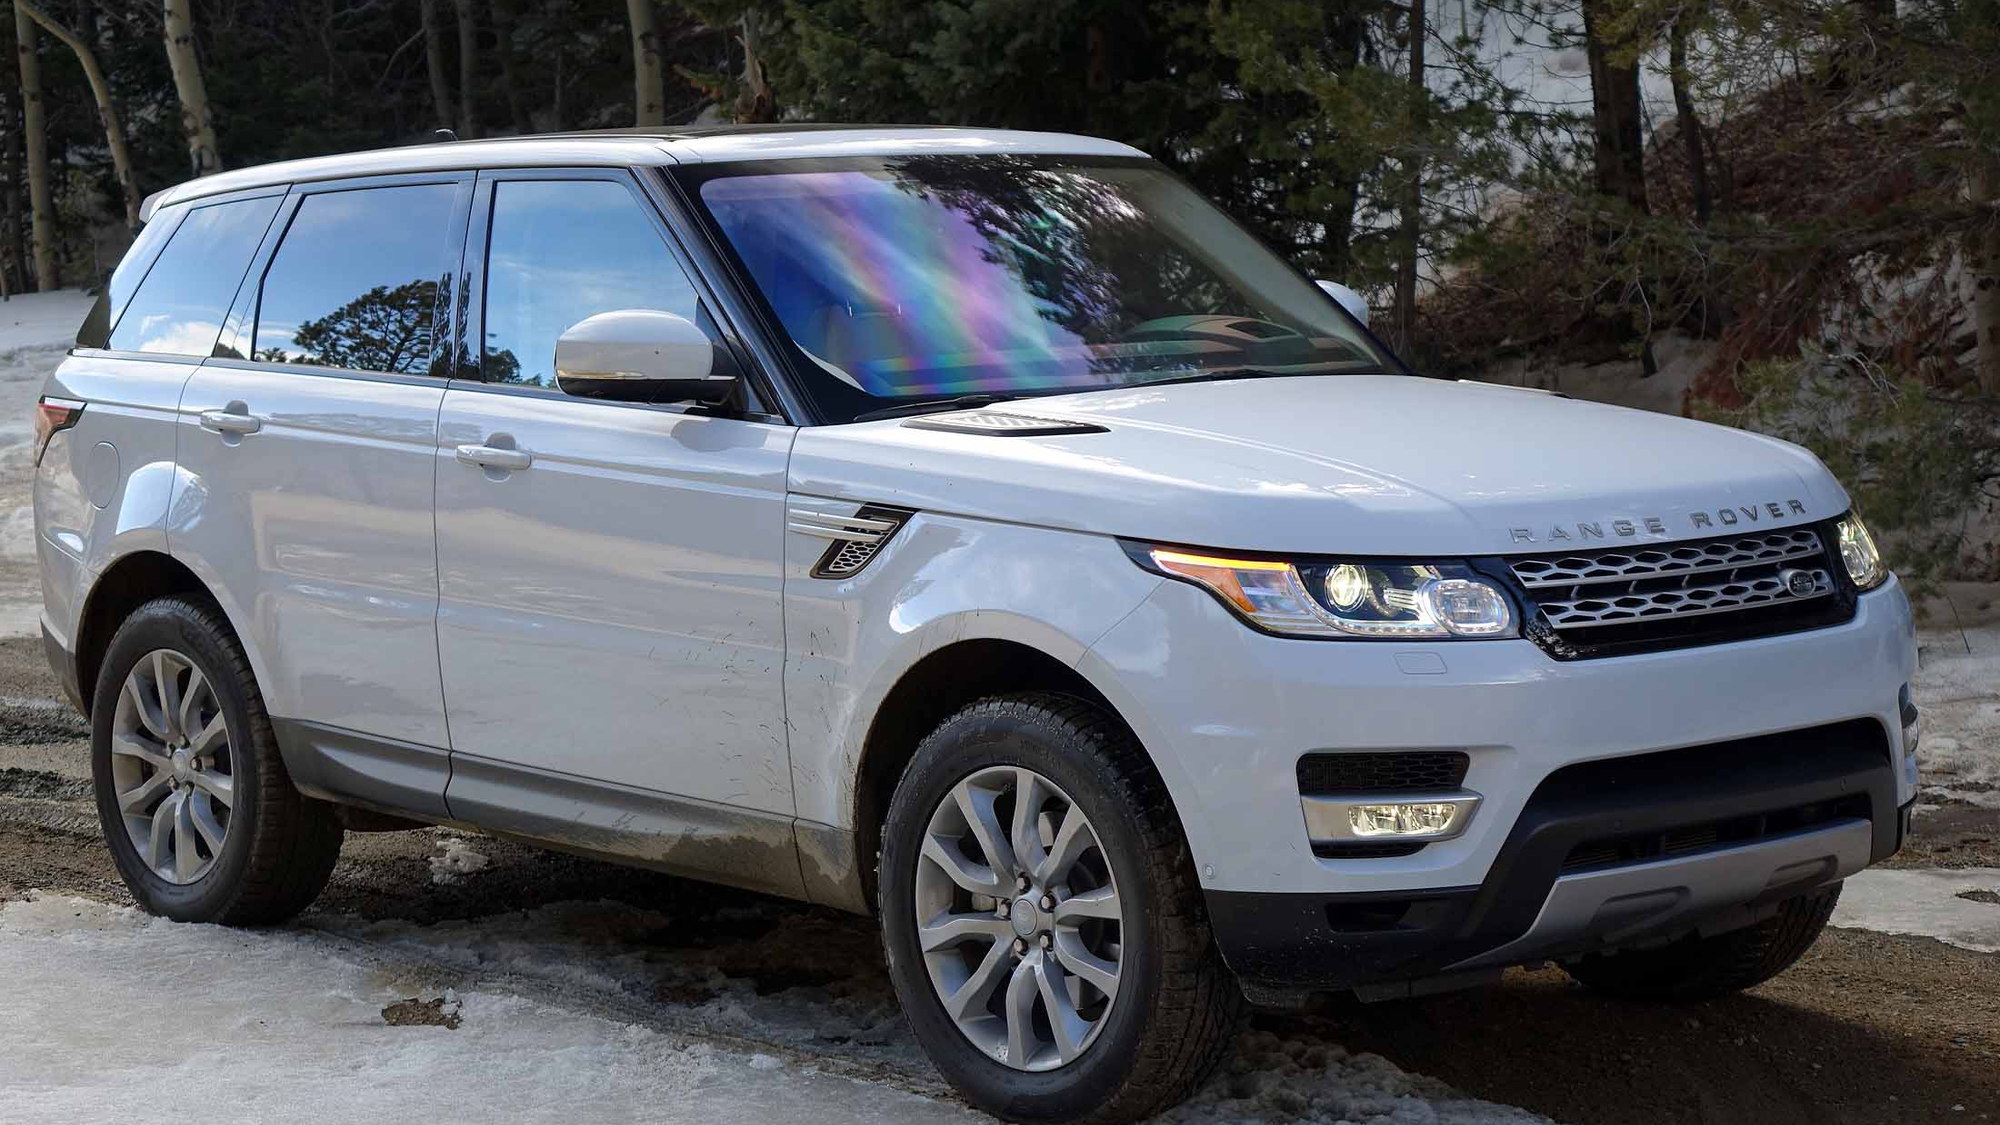 2016 Land Rover Range Rover Sport Hse Td6: Fuel Economy Review Of Luxury  Diesel Suv